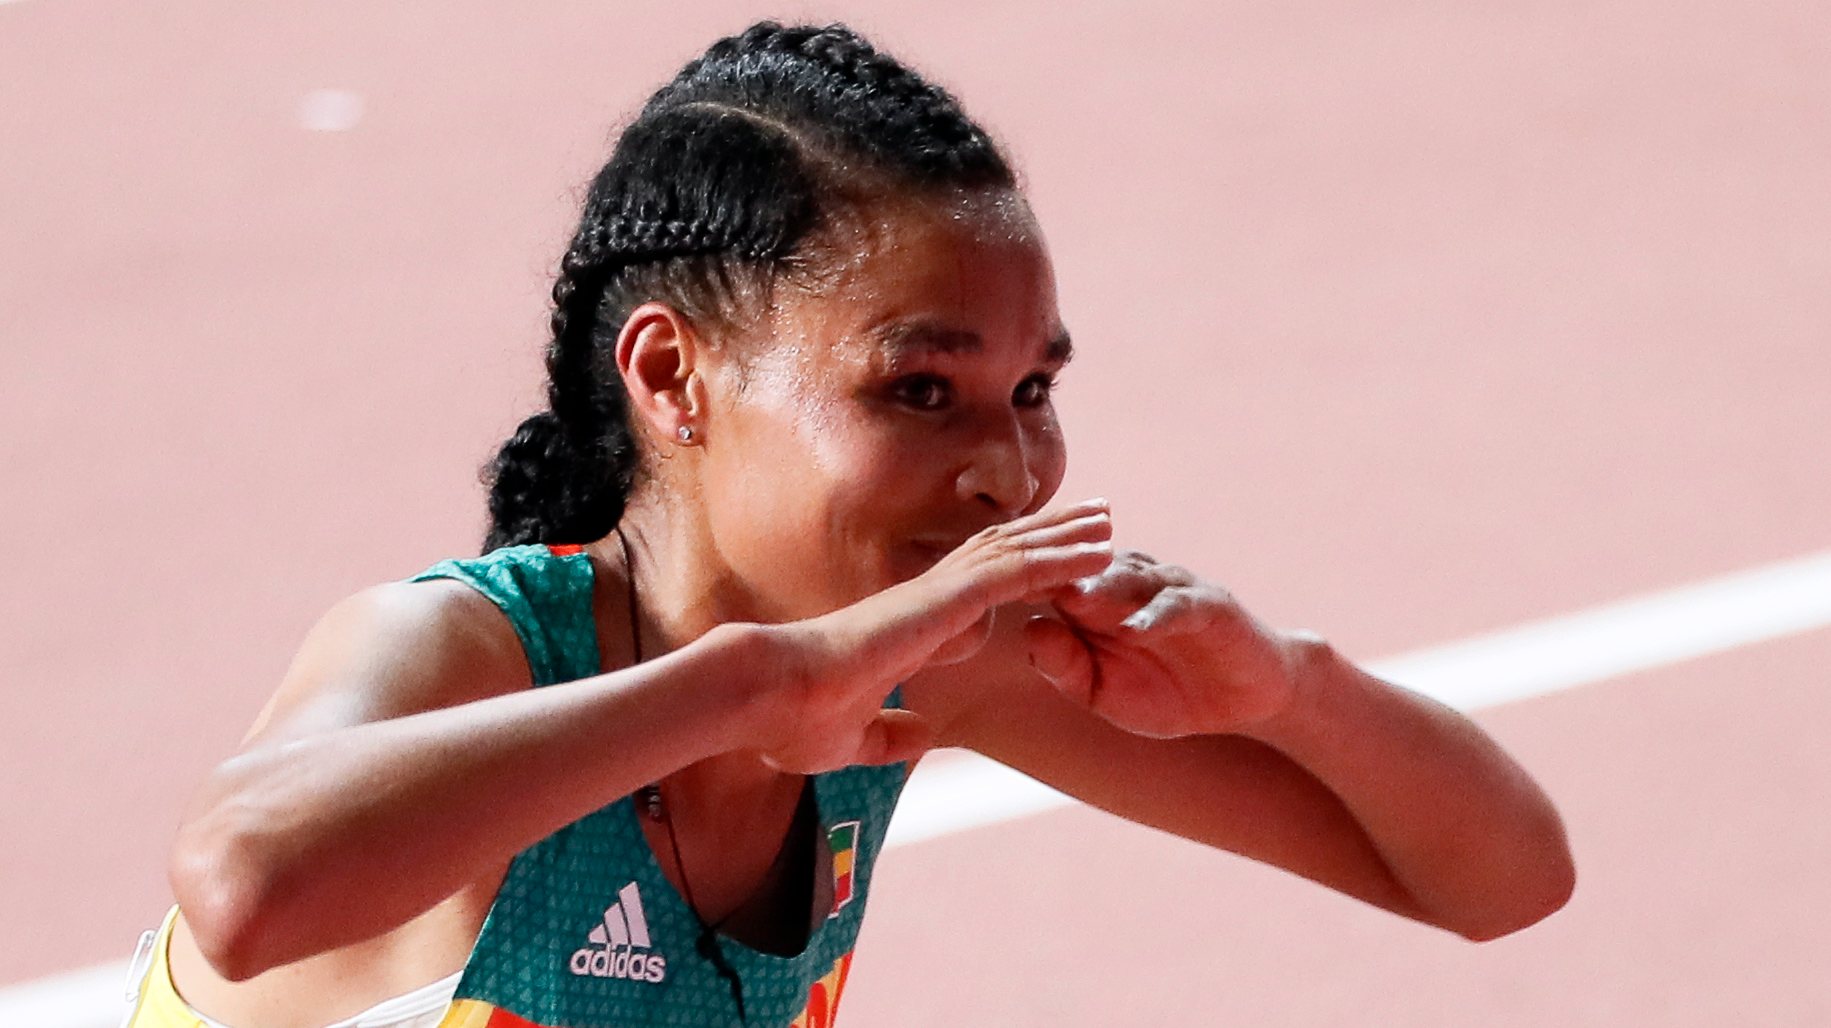 epa07878172 Letesenbet Gidey of Ethiopia celebrates after taking the second place in the women&#039;s 10,000m final during the IAAF World Athletics Championships 2019 at the Khalifa Stadium in Doha, Qatar, 28 September 2019. EPA/ROBERT GHEMENT